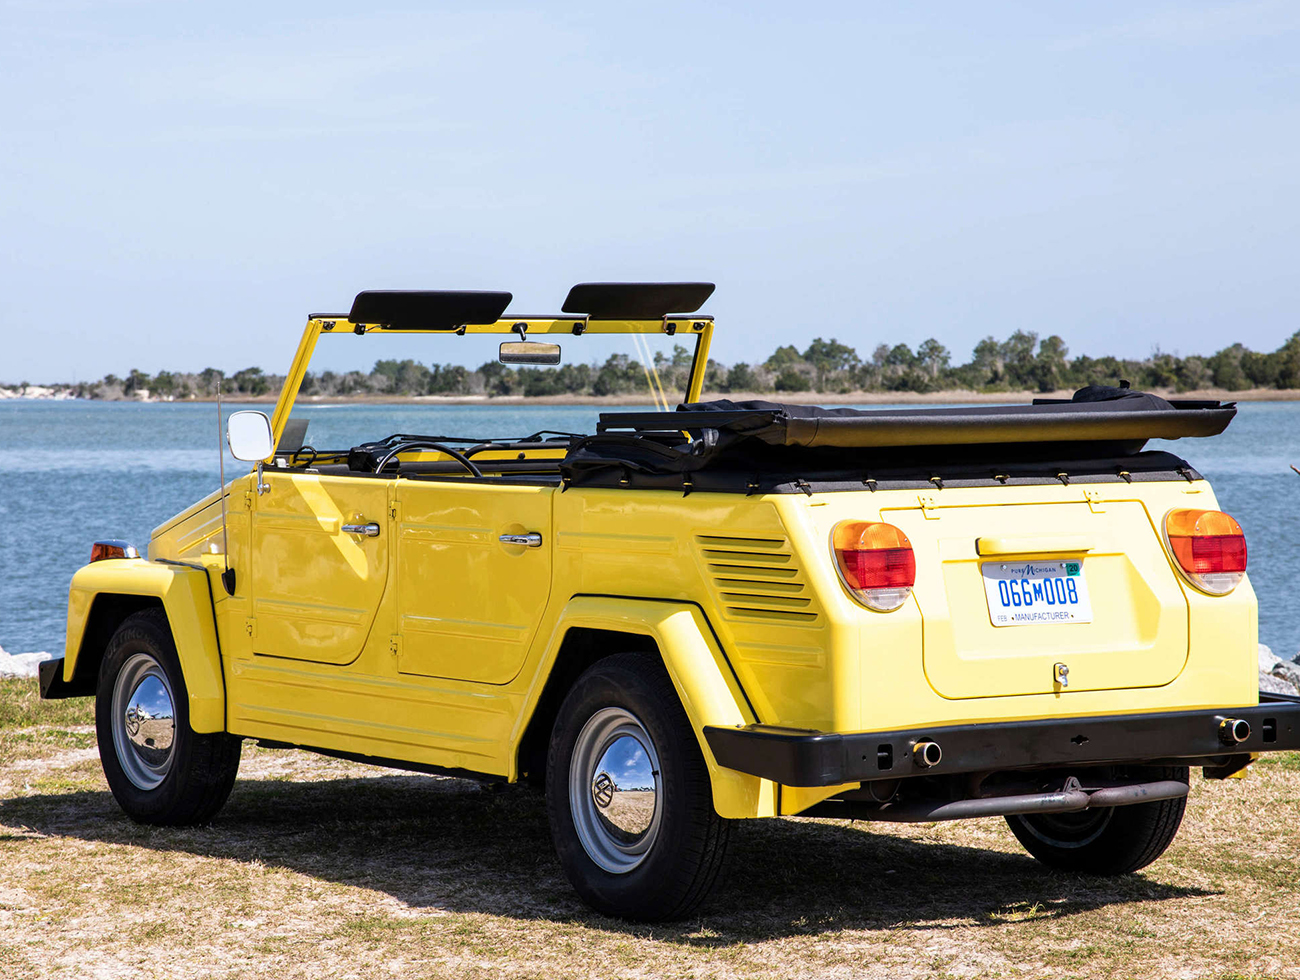 Is the VW Thing Staging a Comeback?